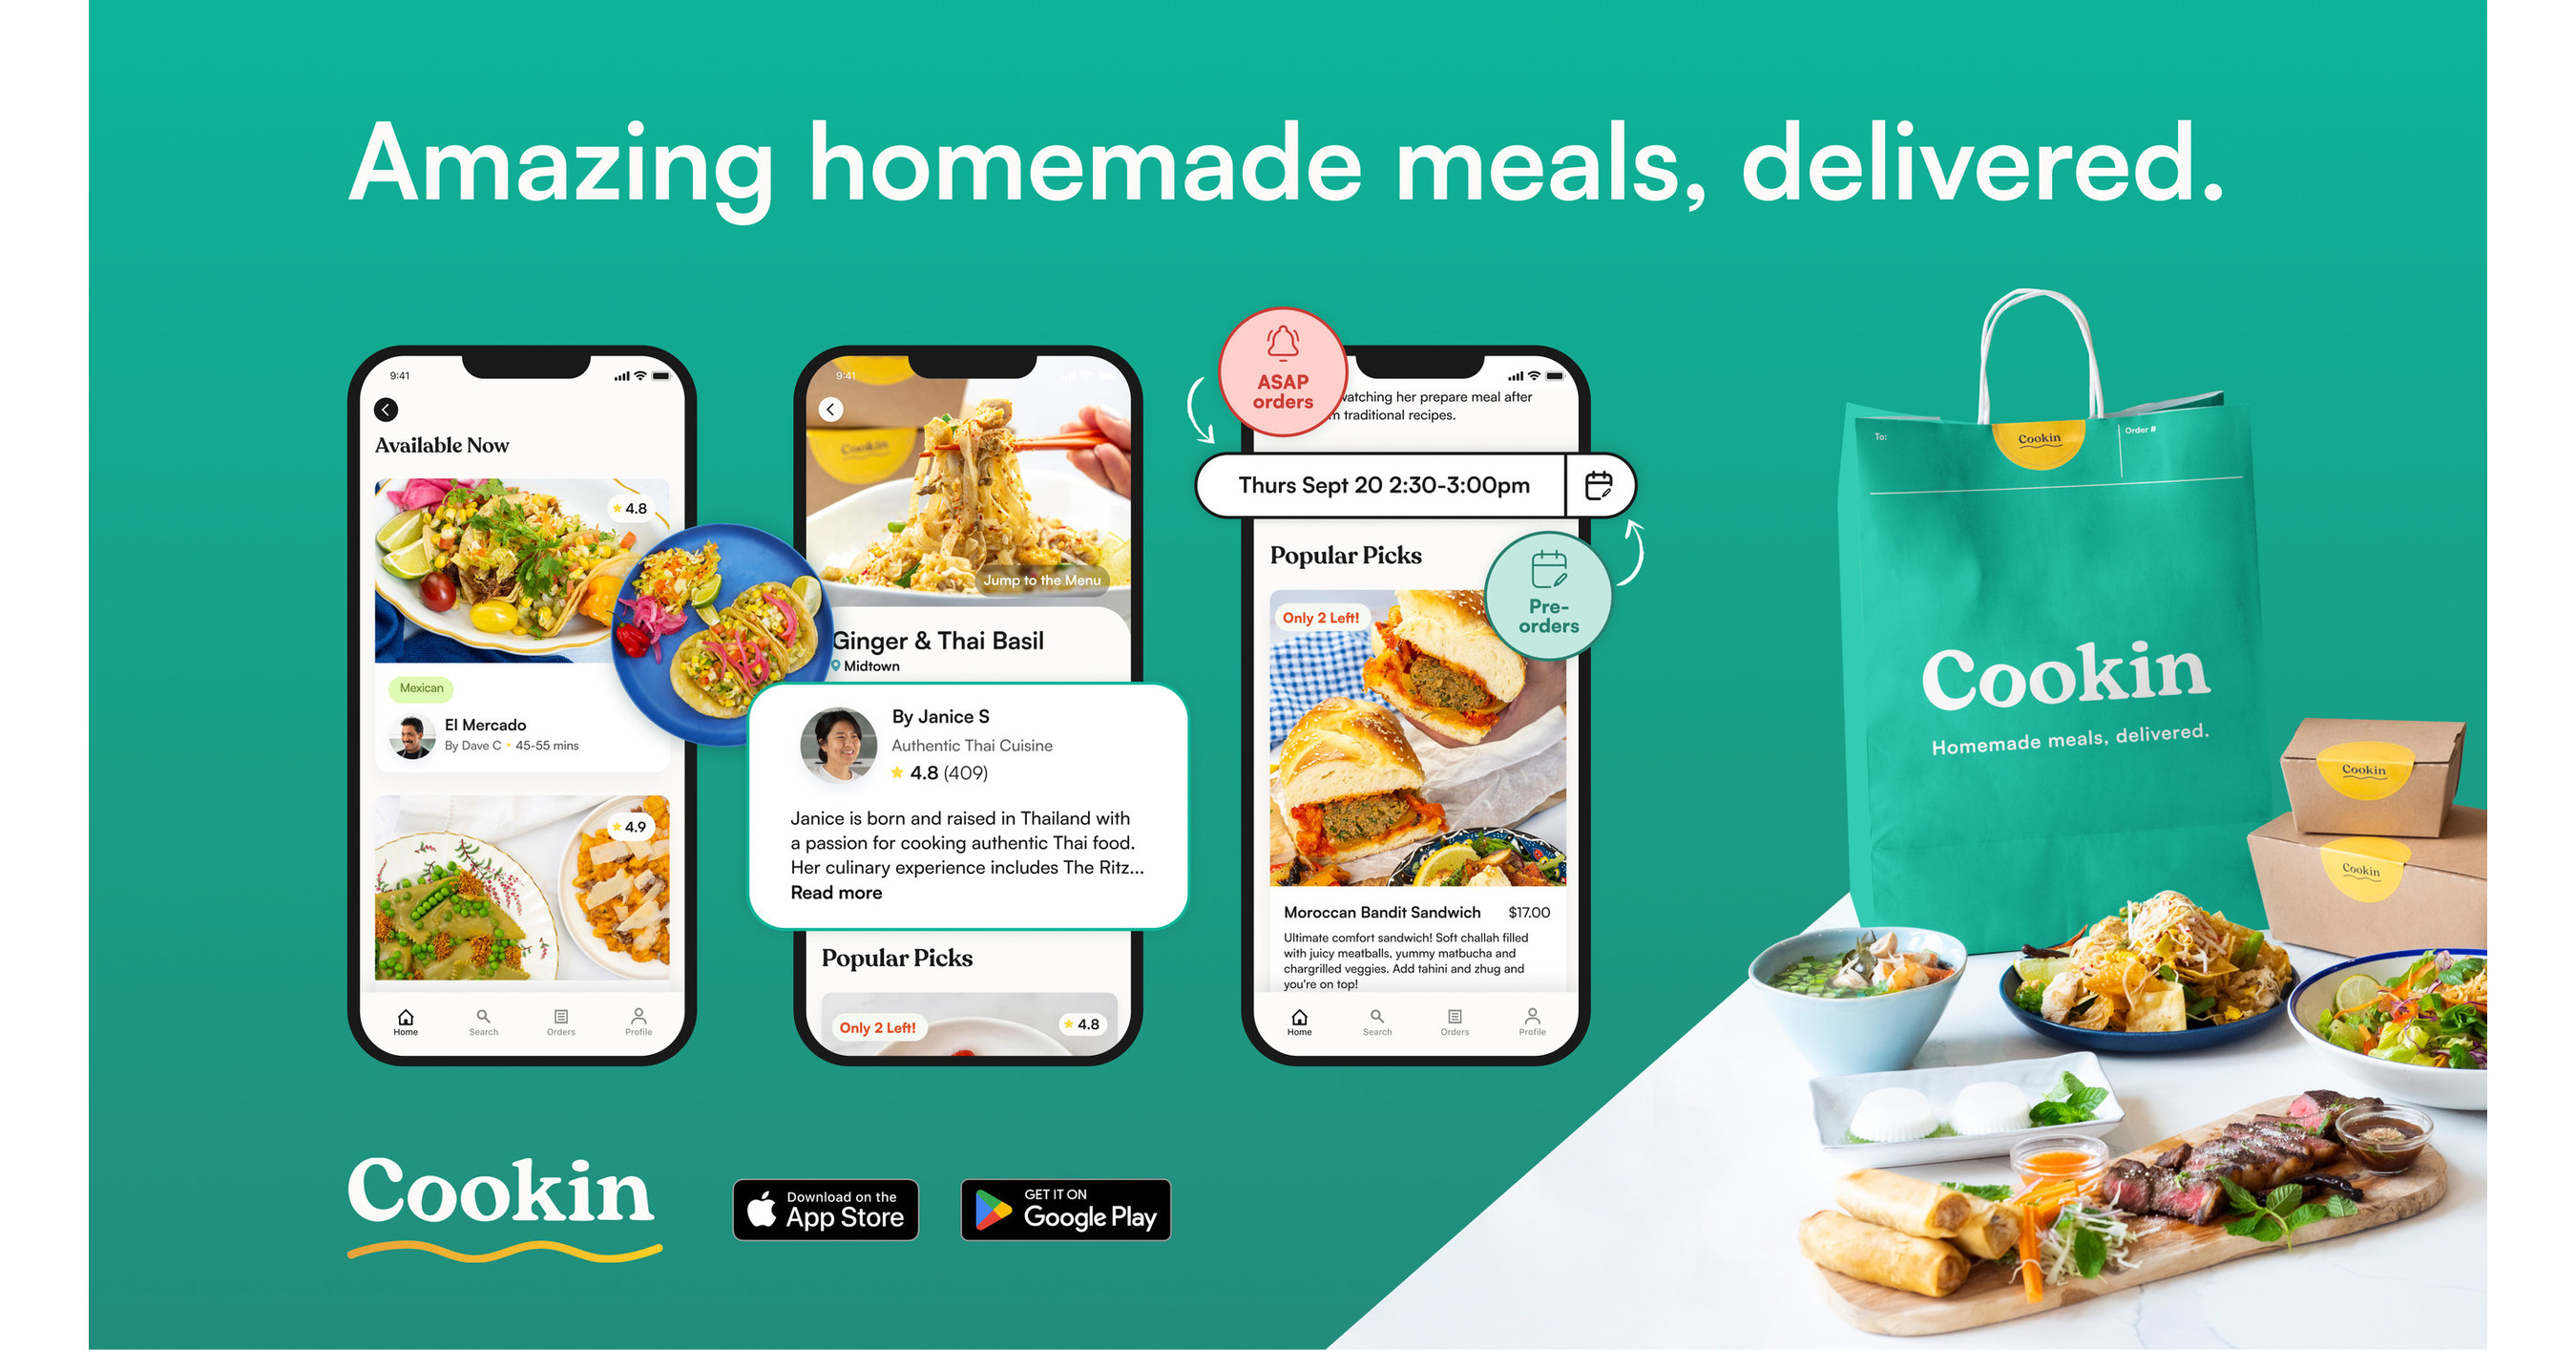 New Food Delivery Marketplace in Toronto Brings Homemade Meals to Your Doorstep